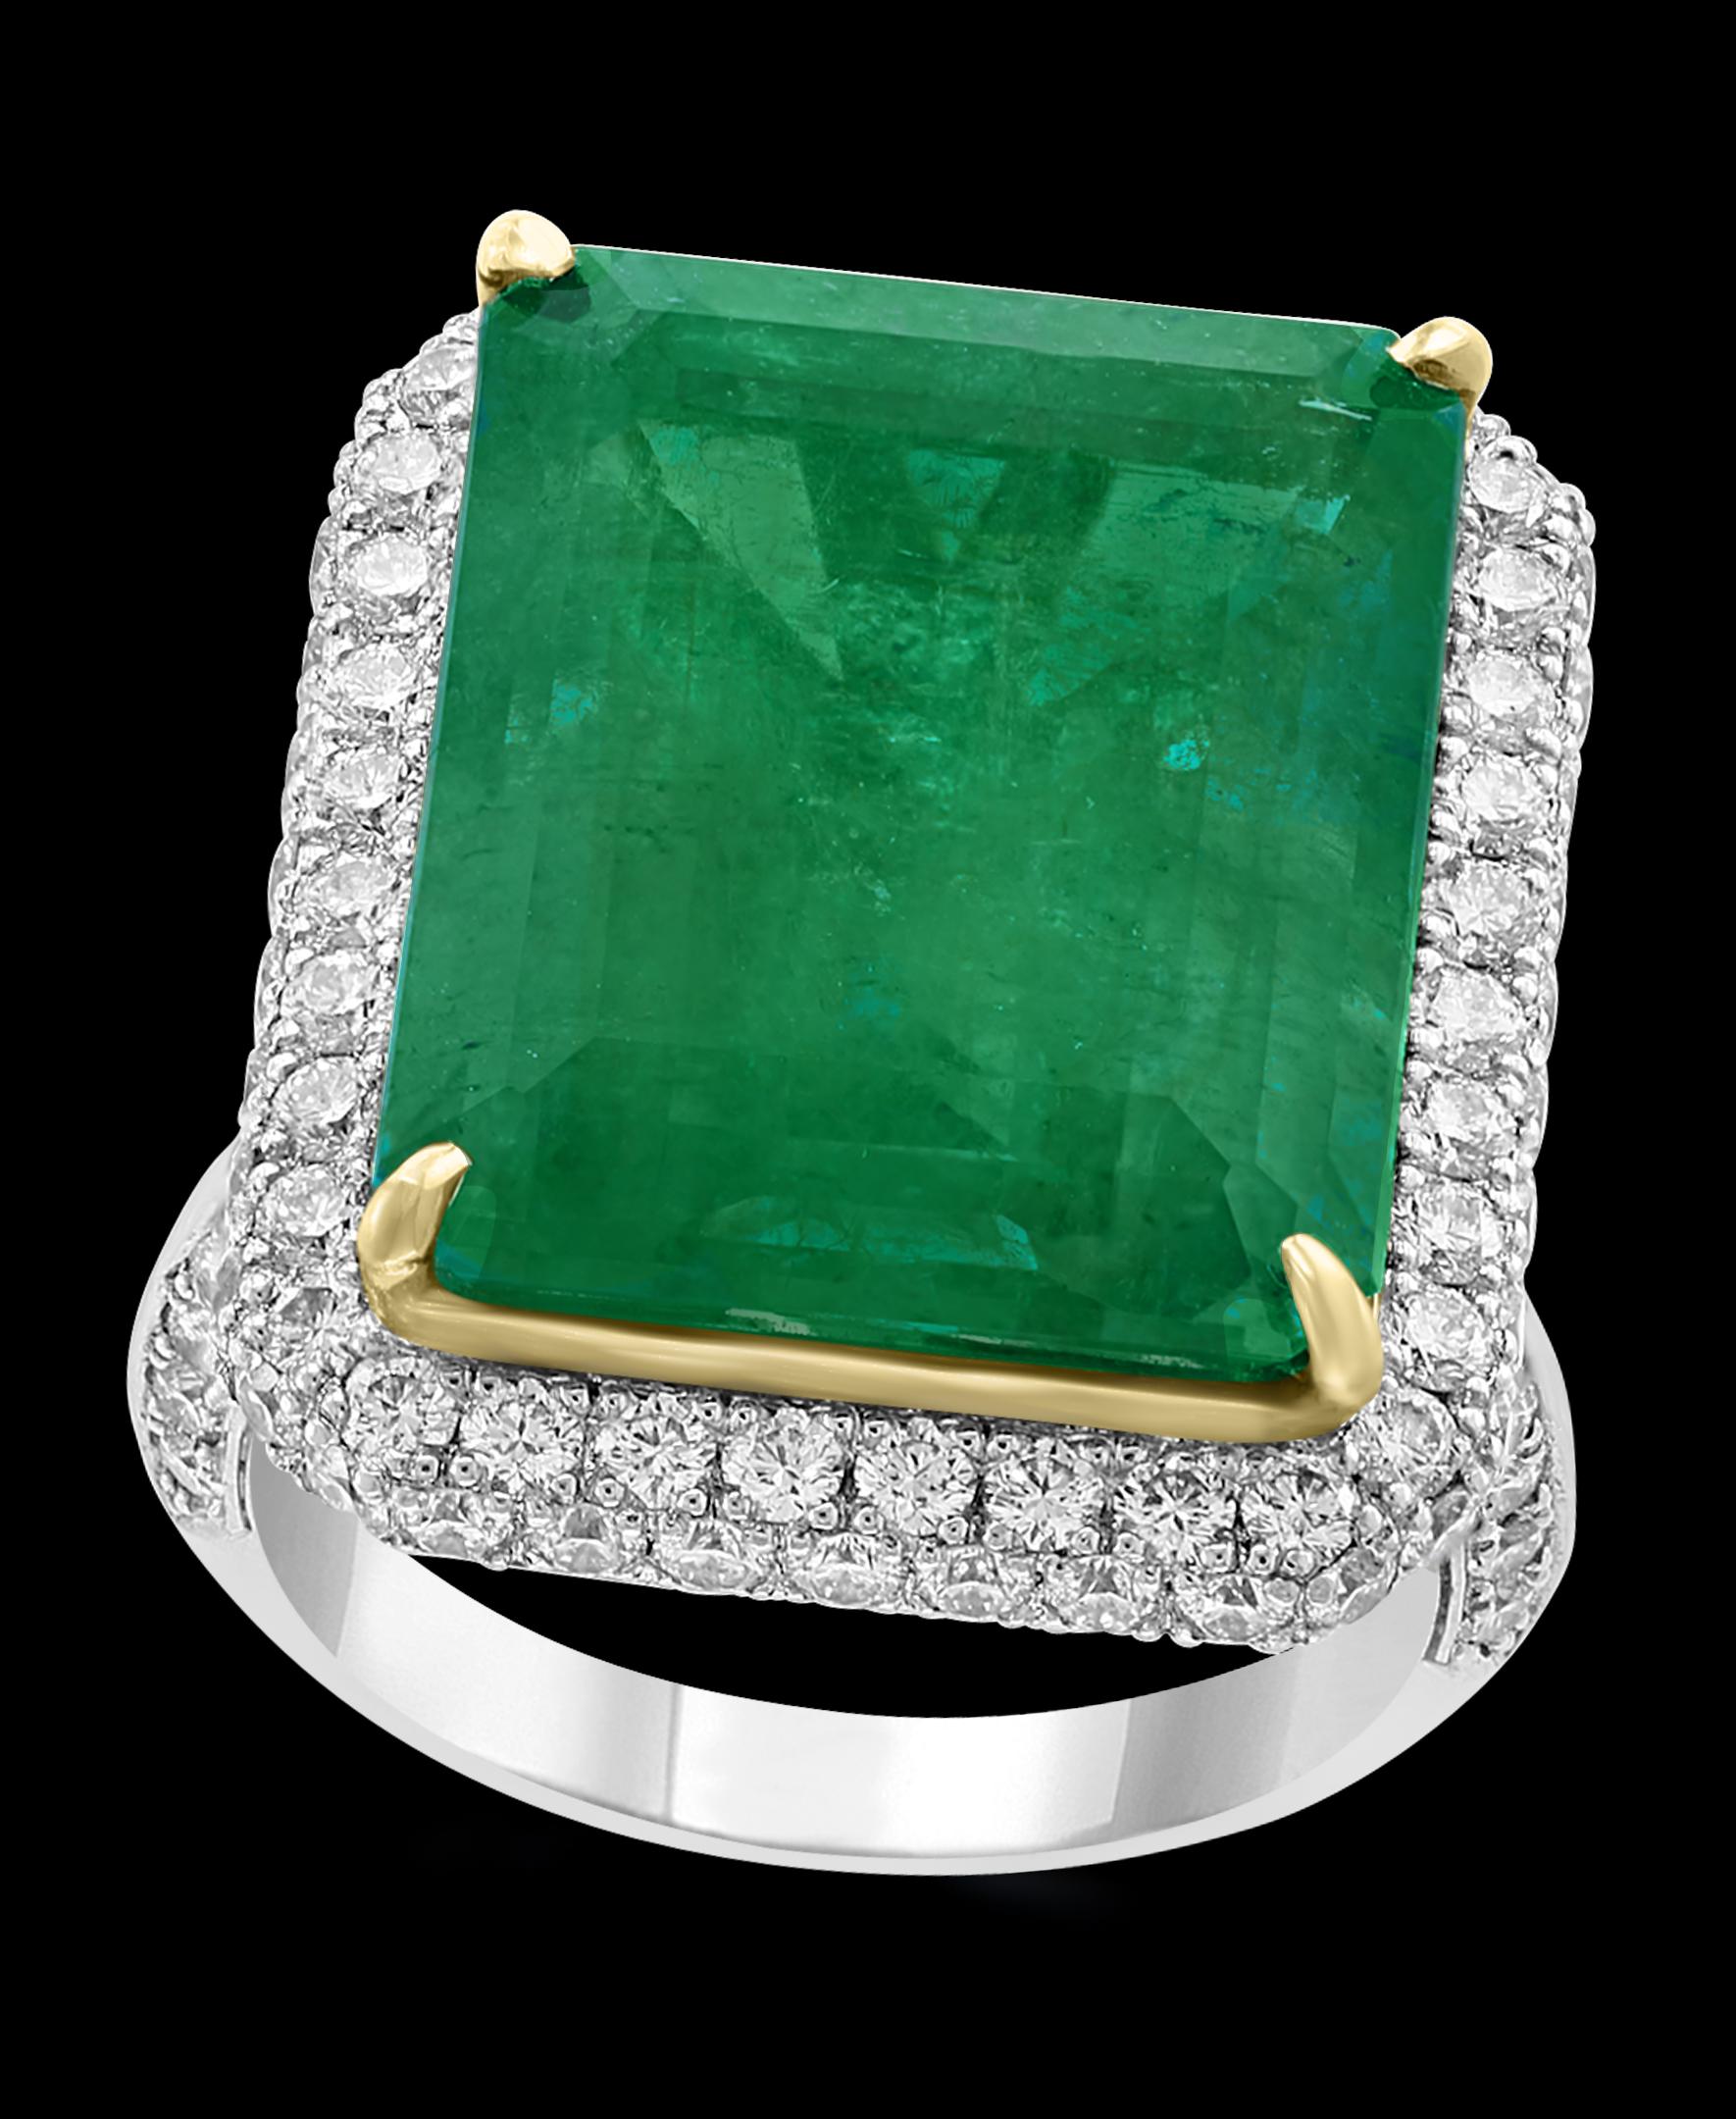 AGL Certified  13.10 Ct  Emerald Cut Colombian  Emerald  Diamond 18K Gold Ring 
A classic, cocktail  / Engagement ring 
13.1 Carat  of  Finest Colombian Emerald and Diamond Ring, Estate
Extreme fine color and luster in the emerald.
Super fine Ring